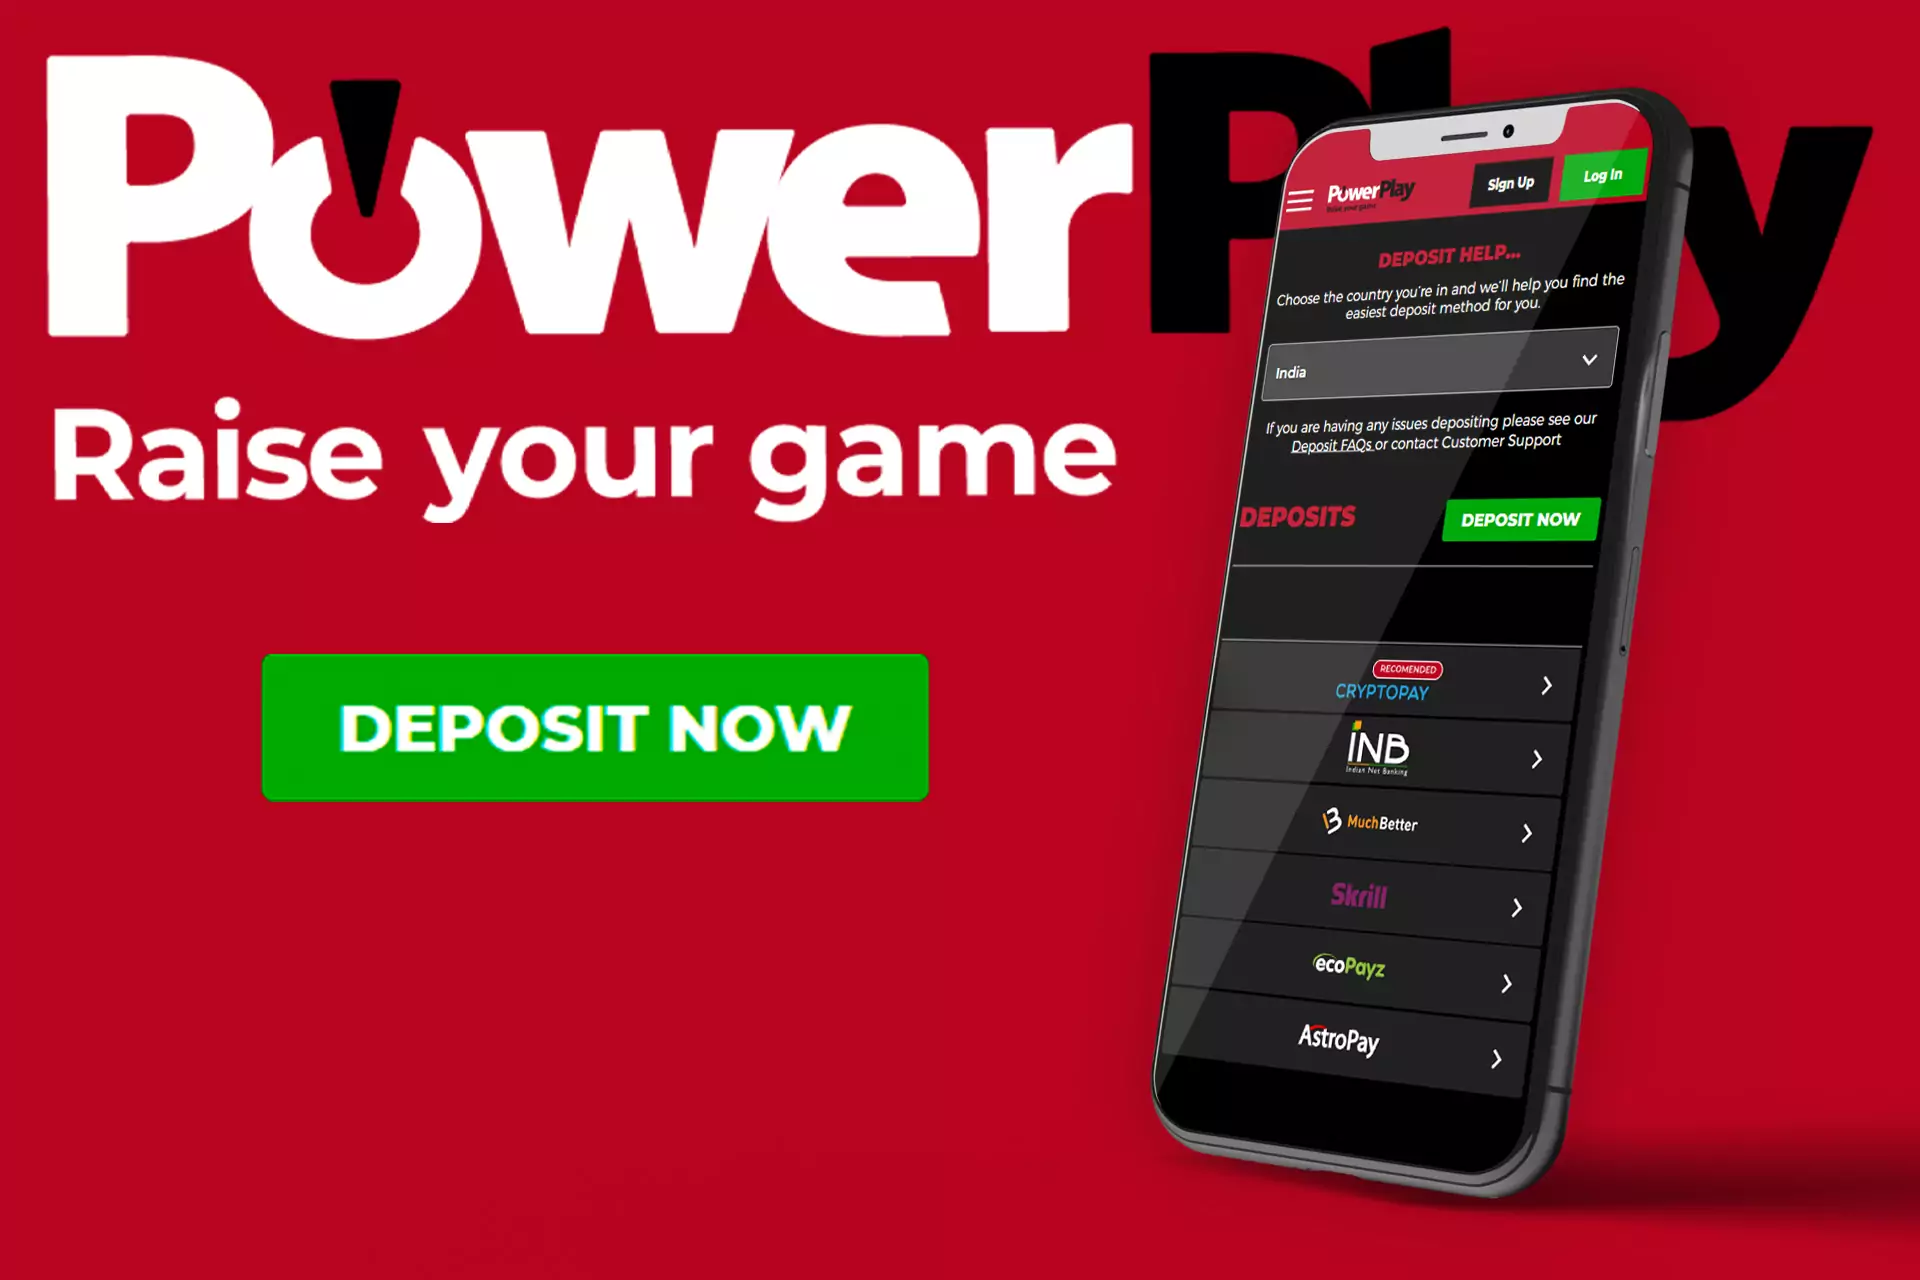 After you create an account, make a deposit to have funds for betting.